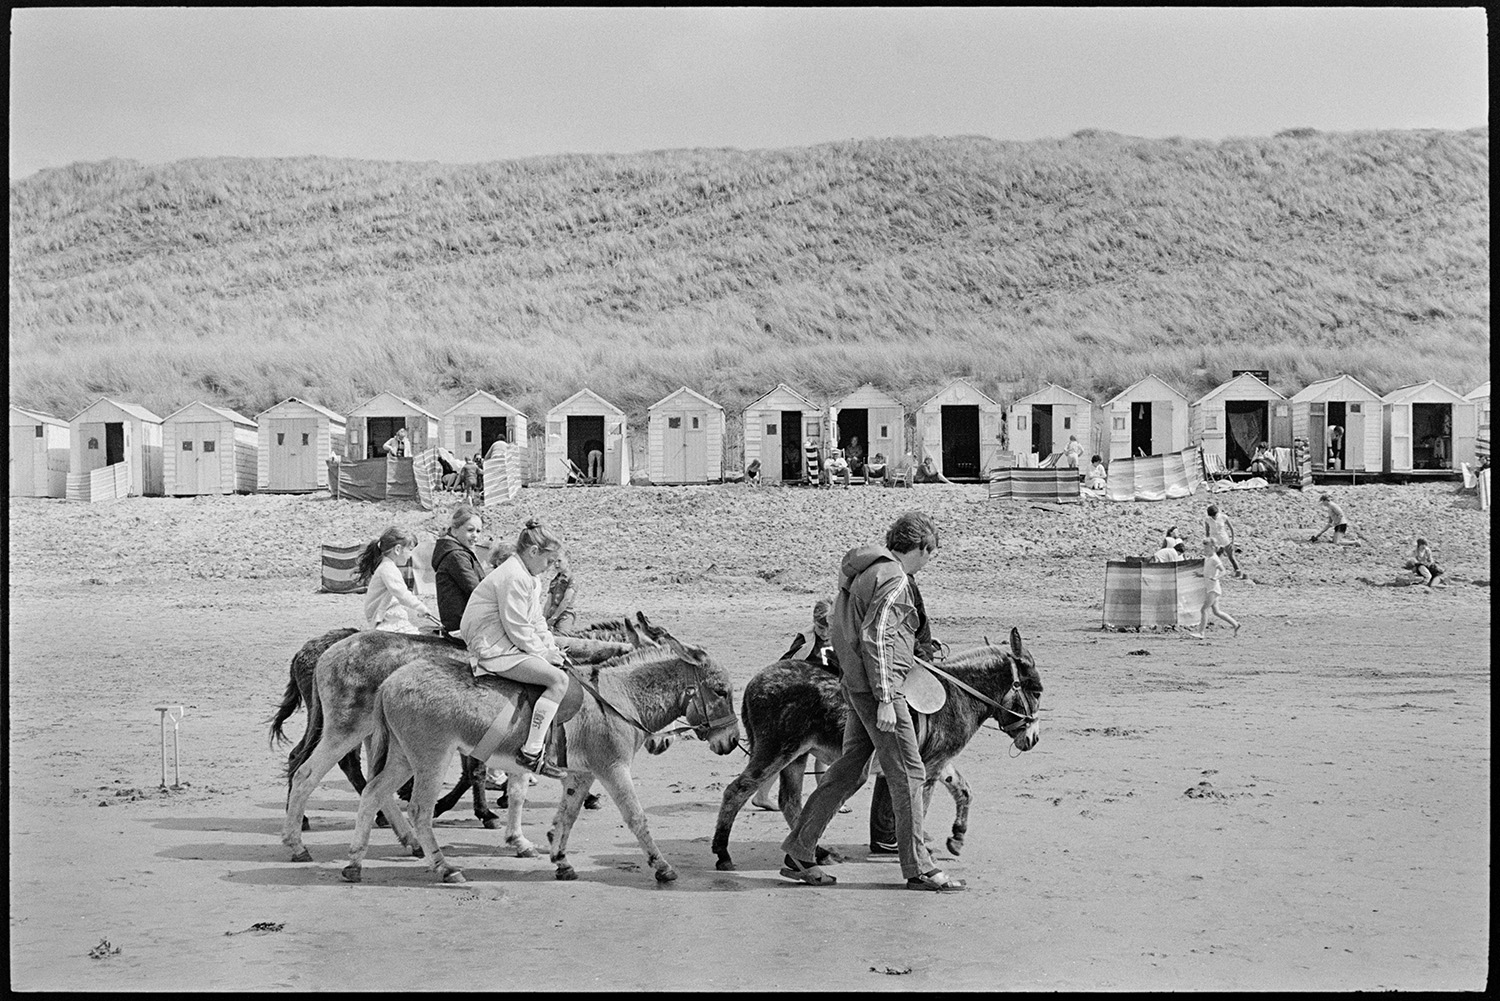 Beach scenes with donkey rides, bathing huts, people swimming.
[Children having donkey rides on Woolacombe beach. Sand dunes, holidaymakers sat behind wind breaks and beach huts are visible in the background.]